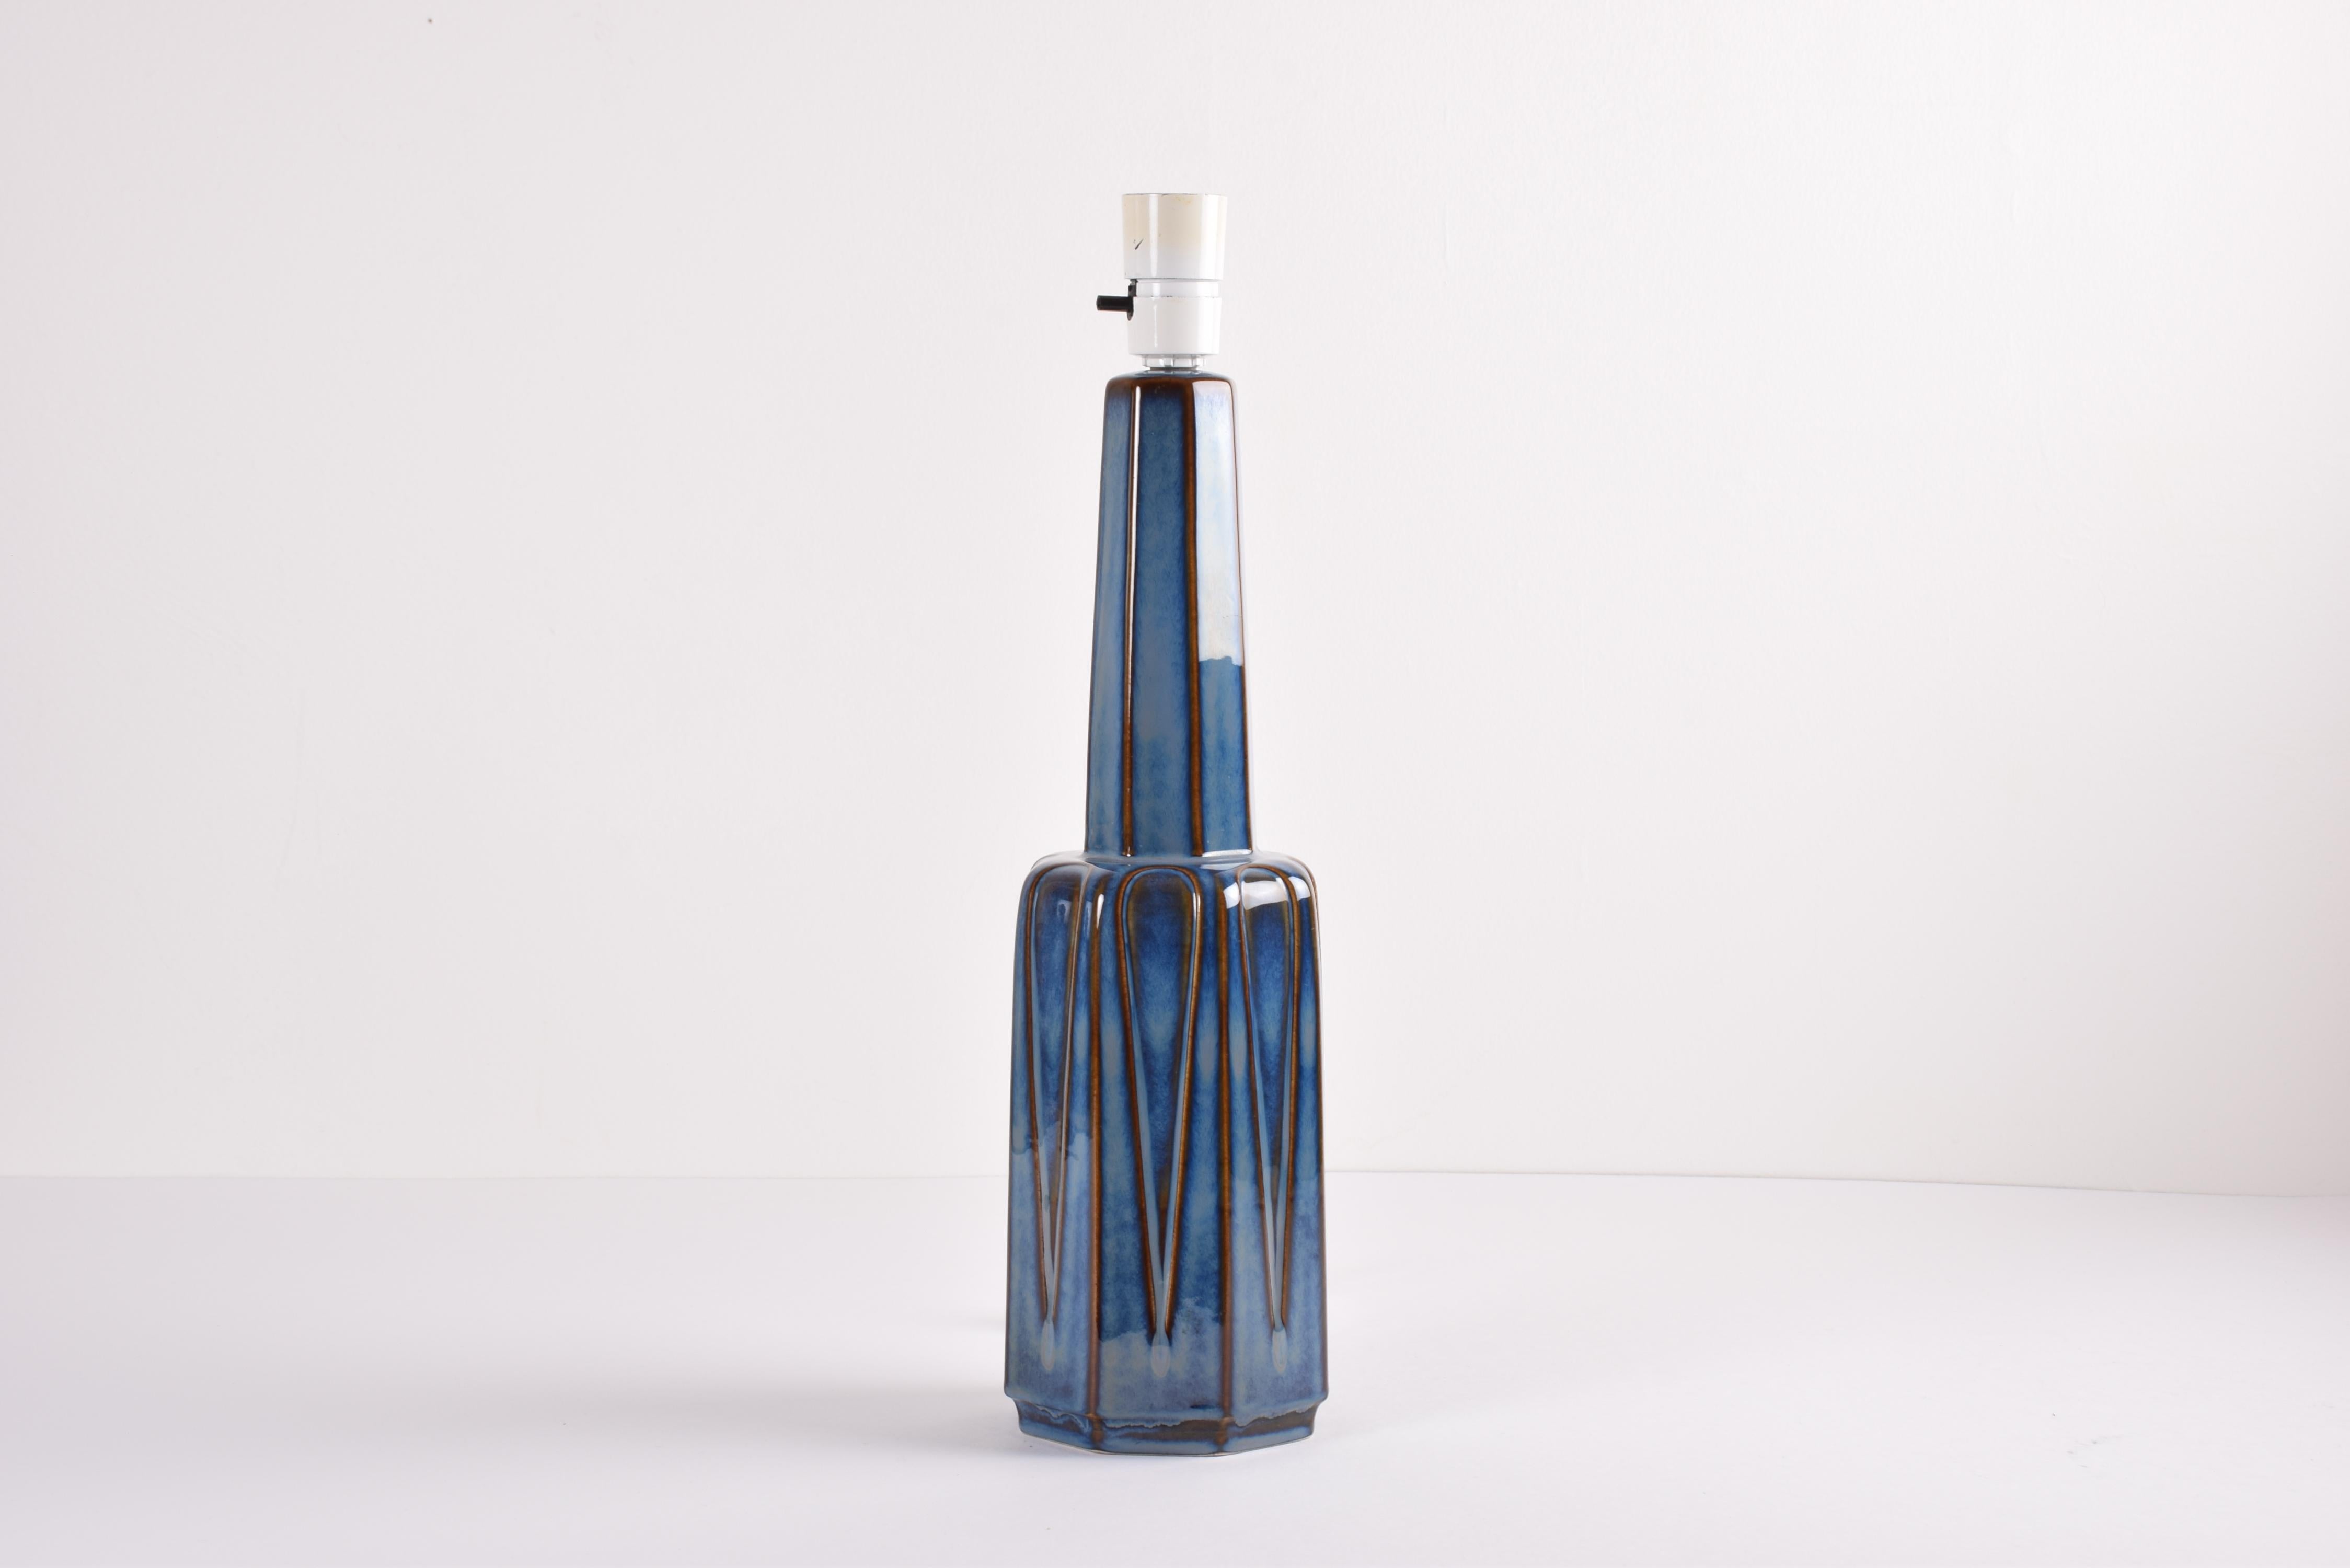 Tall mid-century stylish Danish table lamp from the acknowledged stoneware manufacturer Søholm. Manufactured, circa 1960s. The designer is unknown but it could be by Einar Johansen.

The lamp has a dark blue glaze with elements of brown and pale